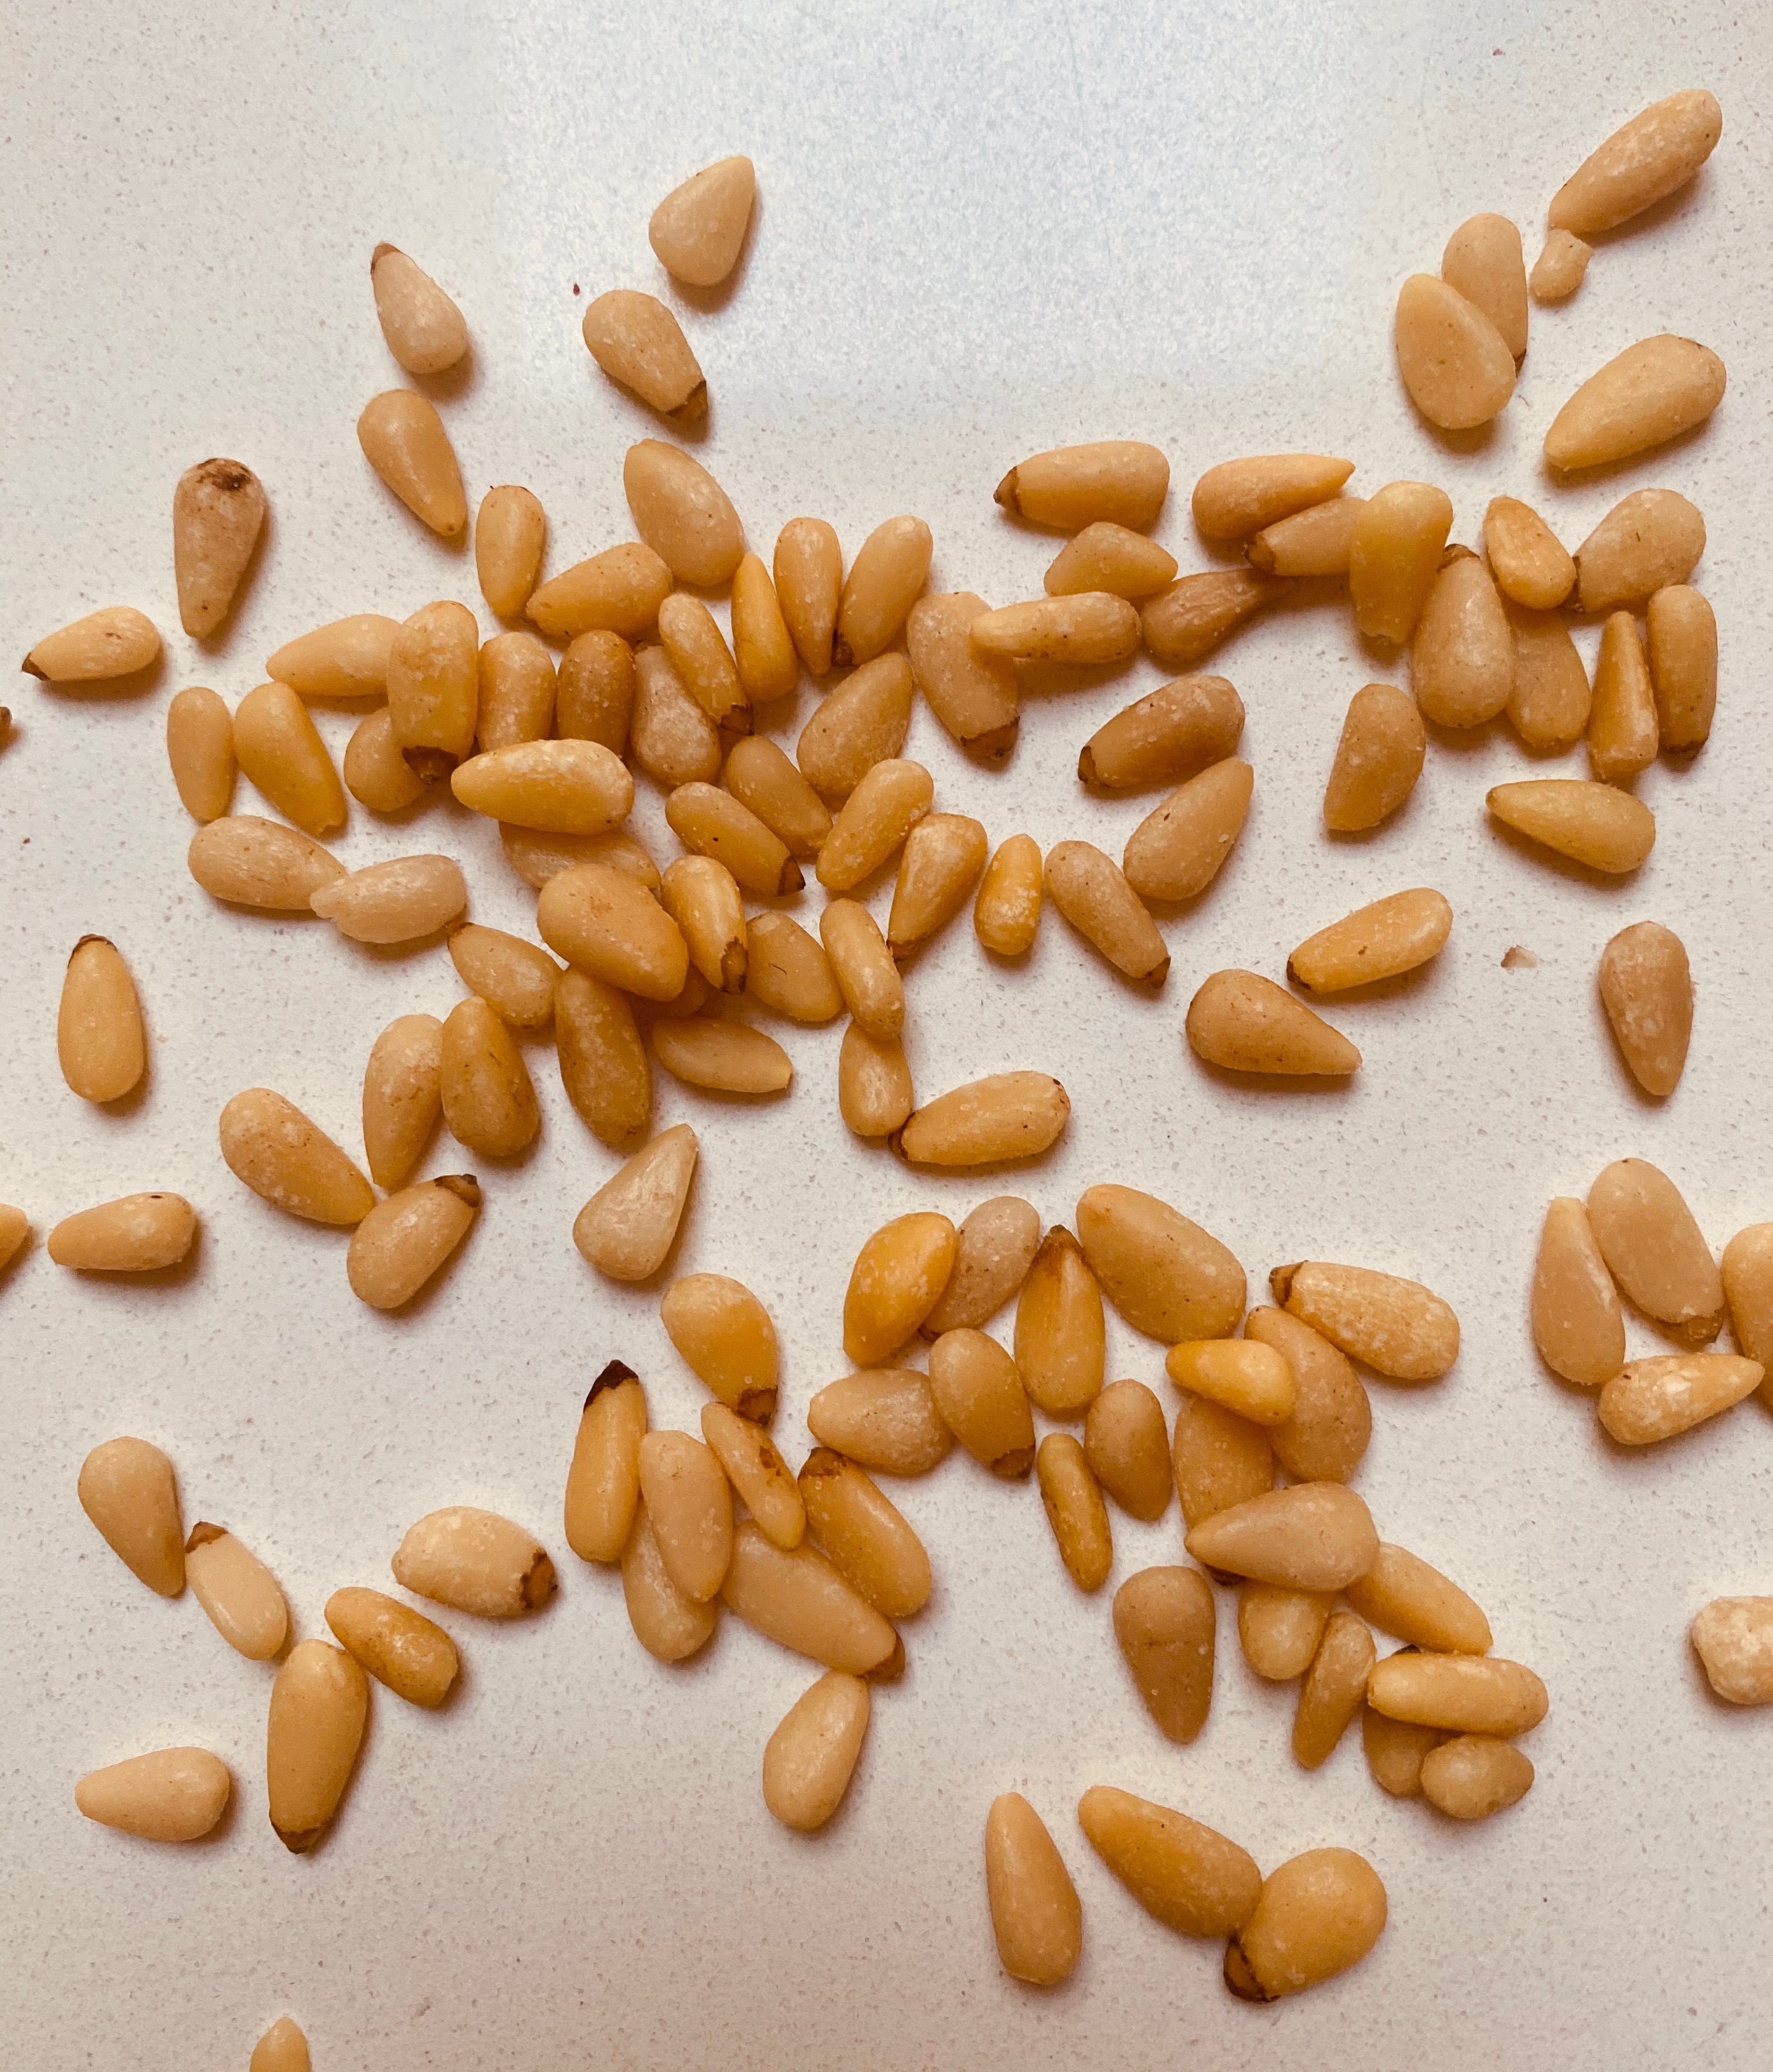 Pine nuts - Aug. 2020